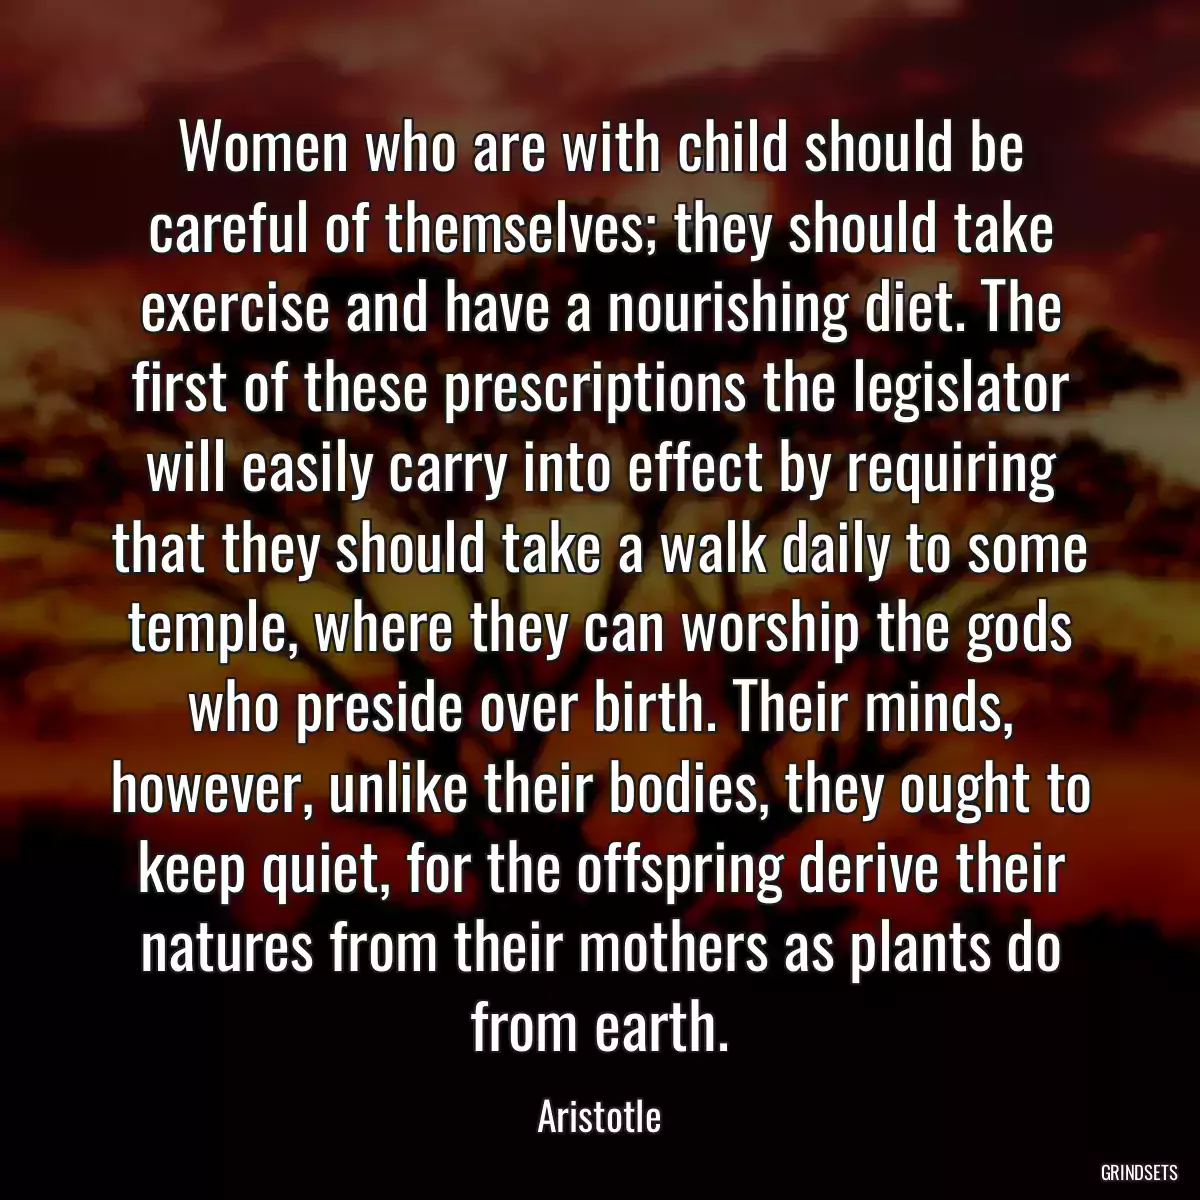 Women who are with child should be careful of themselves; they should take exercise and have a nourishing diet. The first of these prescriptions the legislator will easily carry into effect by requiring that they should take a walk daily to some temple, where they can worship the gods who preside over birth. Their minds, however, unlike their bodies, they ought to keep quiet, for the offspring derive their natures from their mothers as plants do from earth.